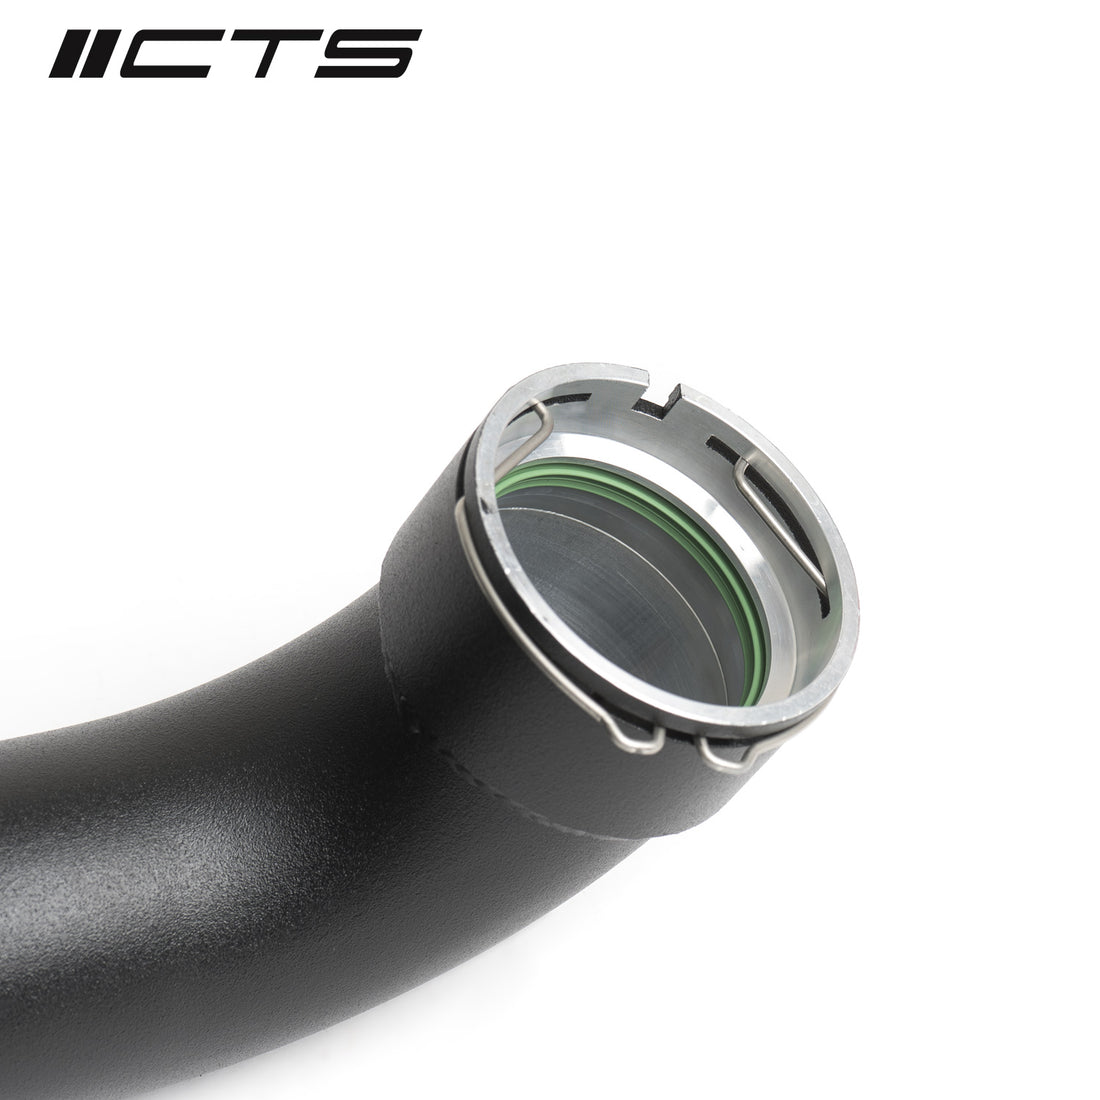 CTS TURBO Charge Pipe Upgrade Kit for F20/F22/F30/F32 and G01/G11/G30/G32 BMW B58 3.0L CTS Turbo IT-341